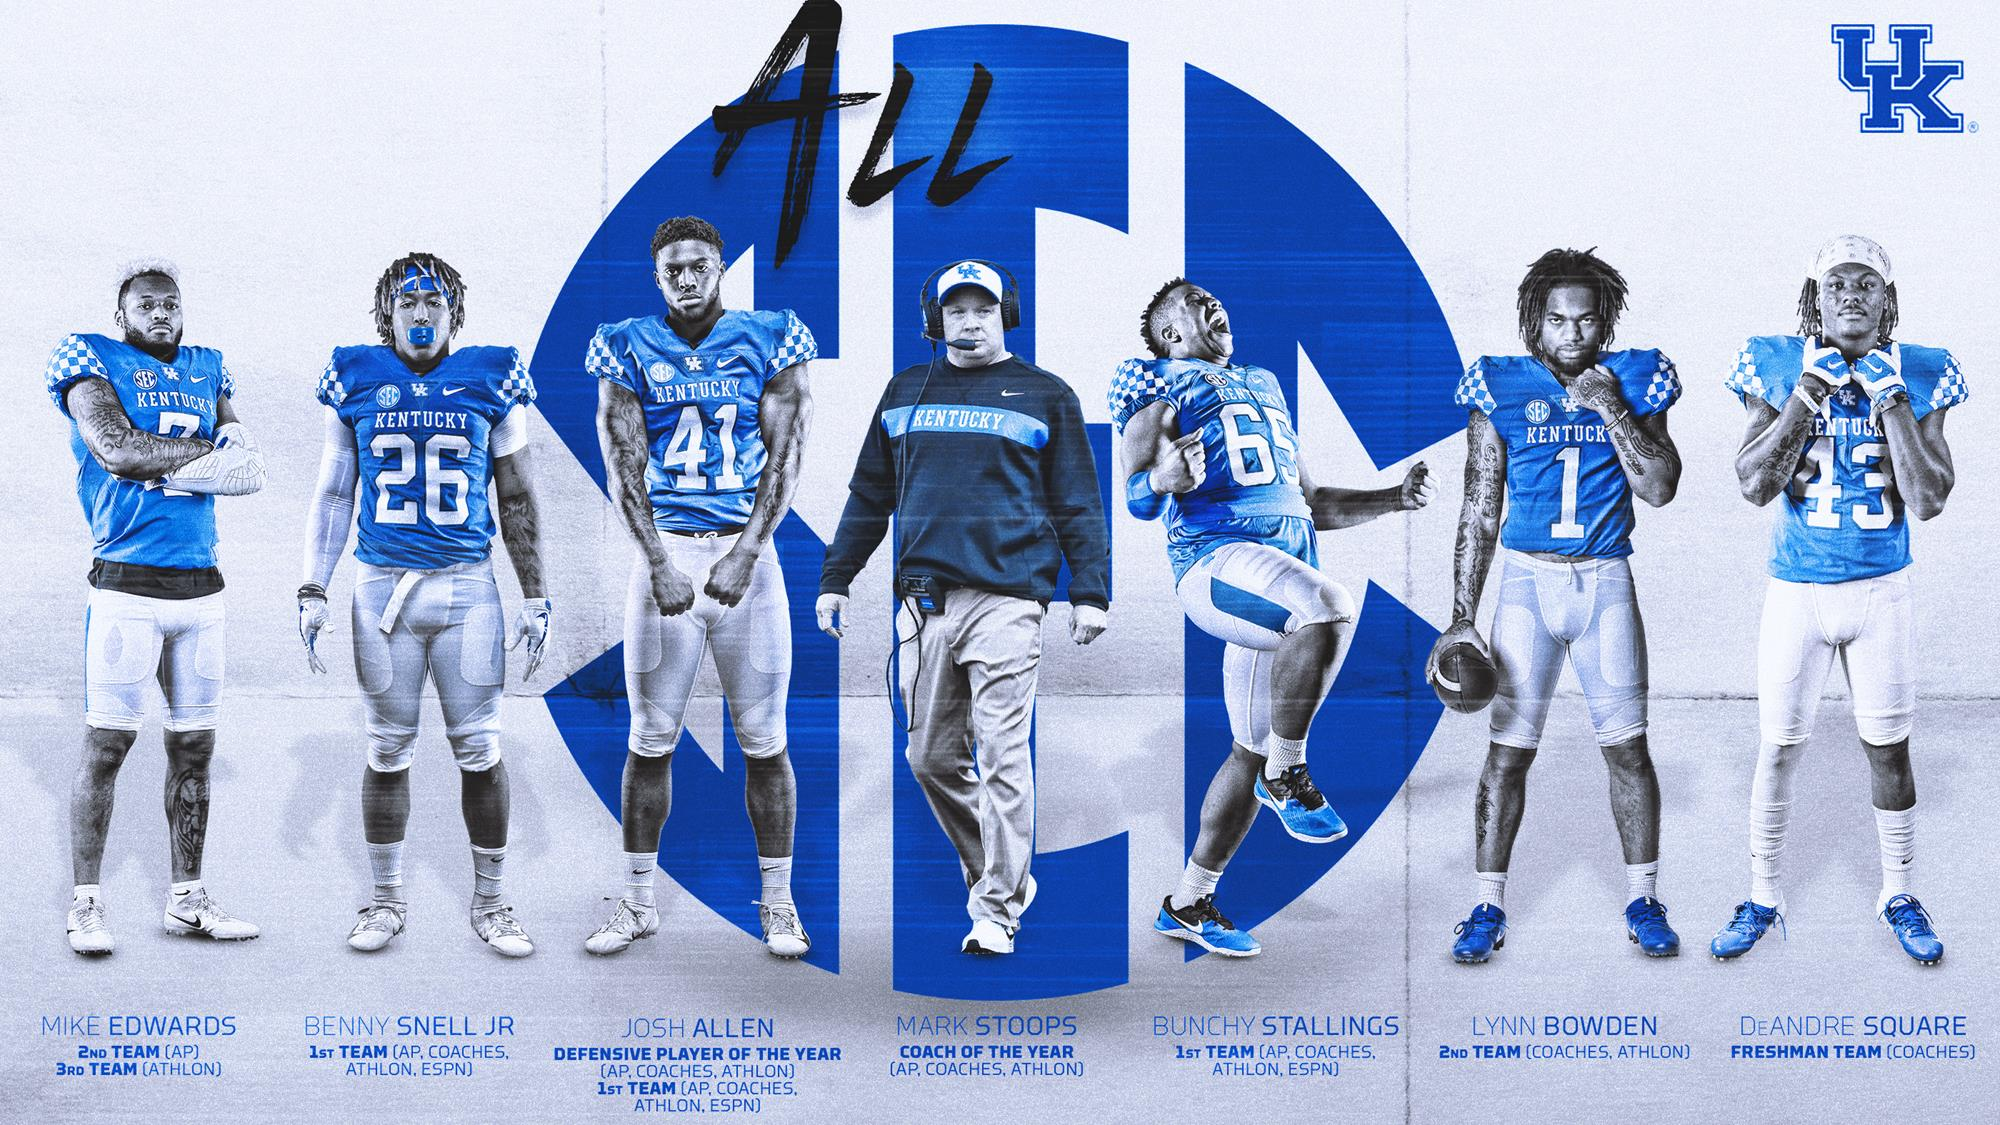 Six Wildcats Receive All-SEC Honors from Athlon Sports, ESPN